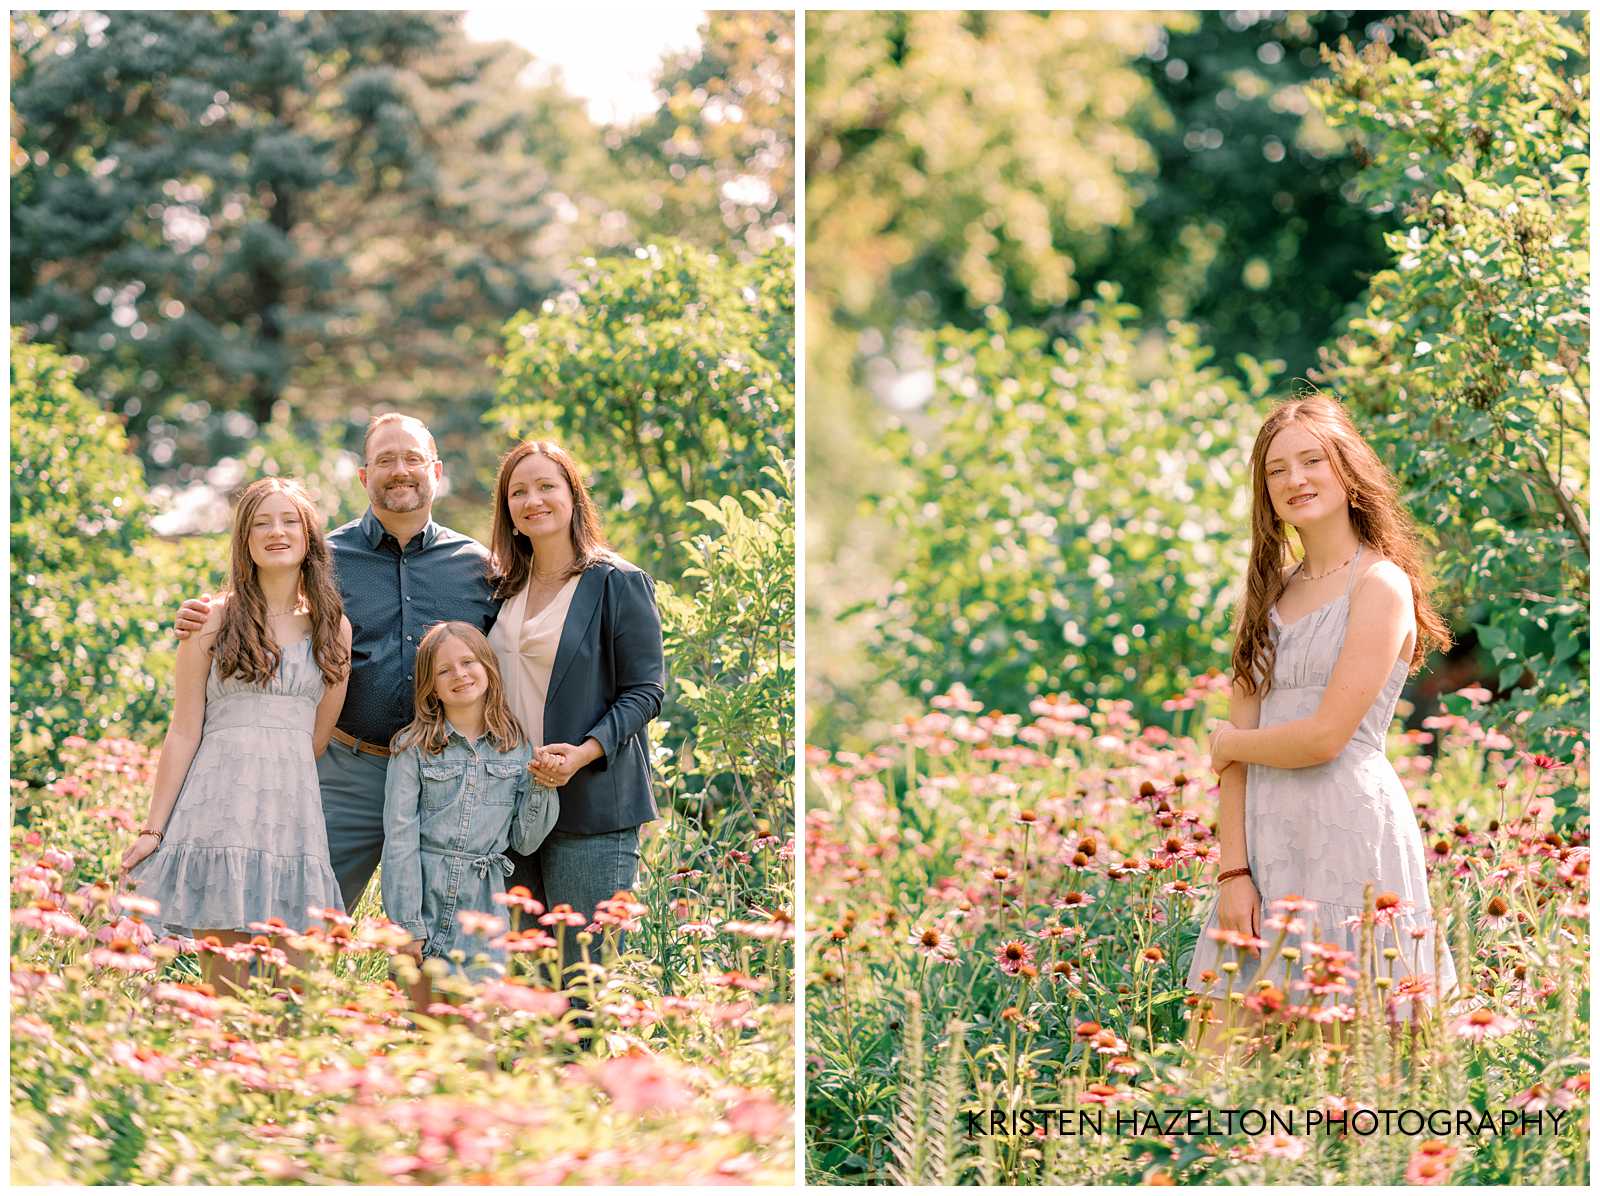 Summer family photos at Lilacia Park in Lombard IL with pink coneflowers